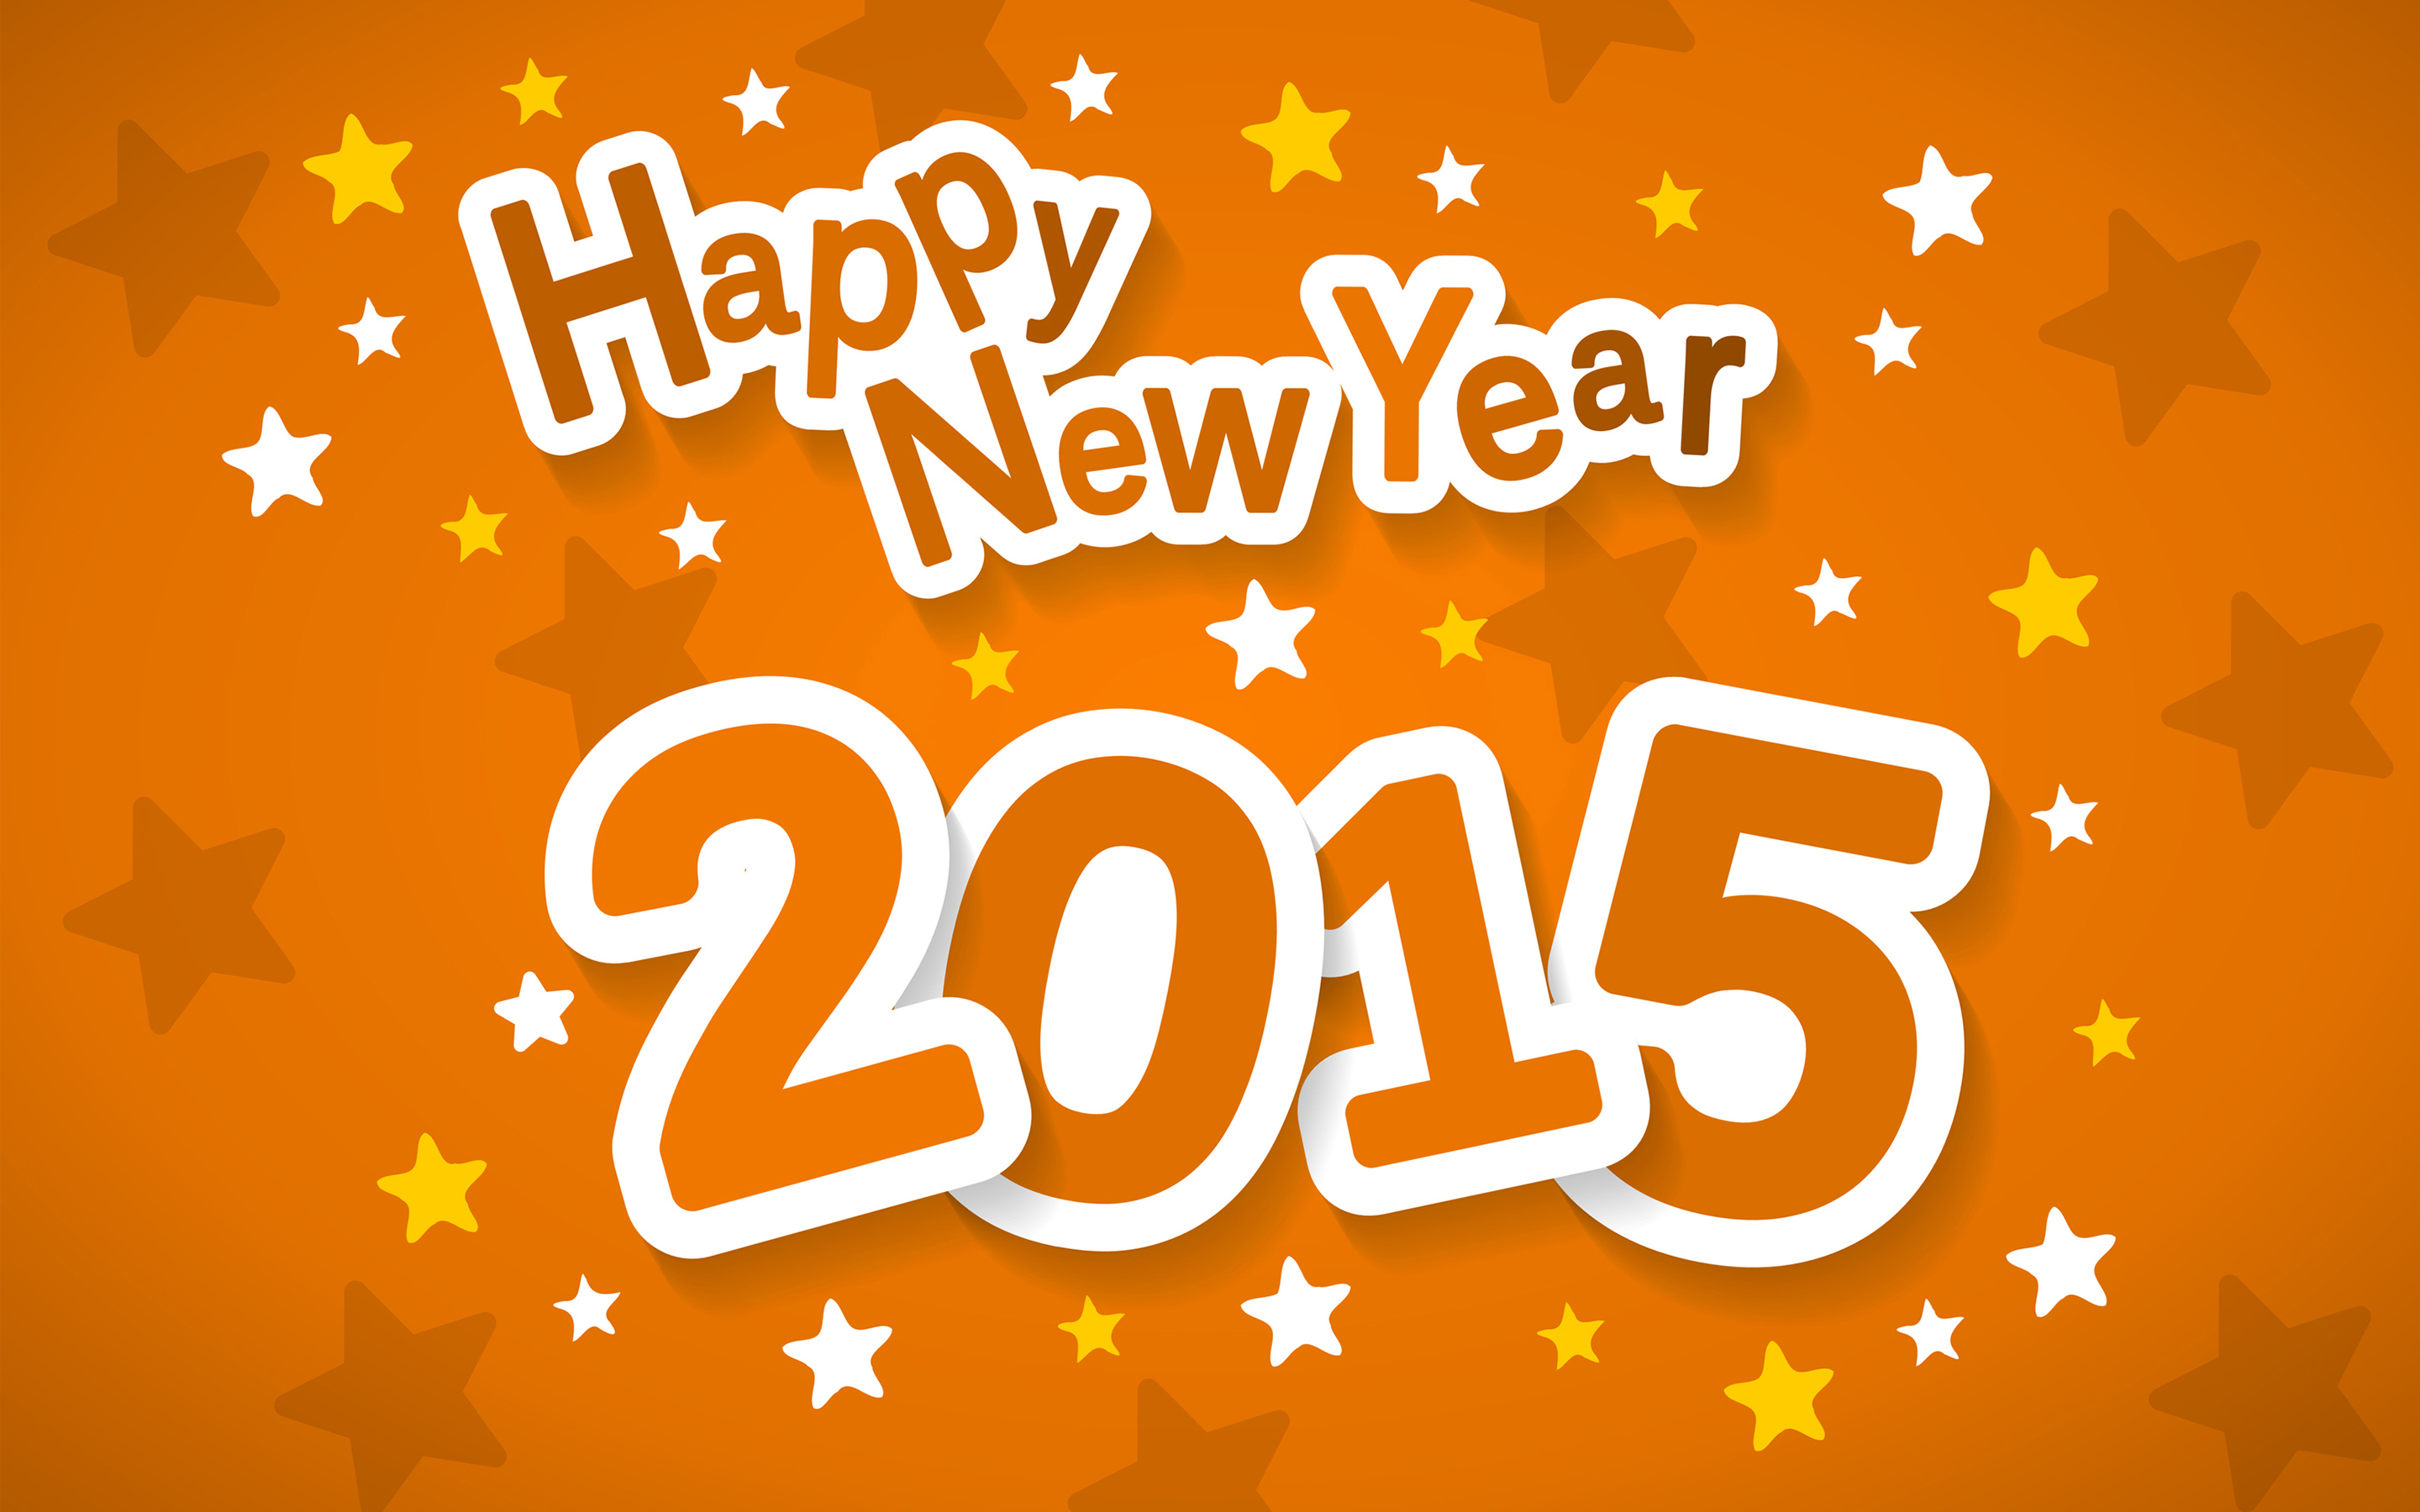 Happy New Year 2015 Wallpapers - Happy New Year Images Downloaded , HD Wallpaper & Backgrounds